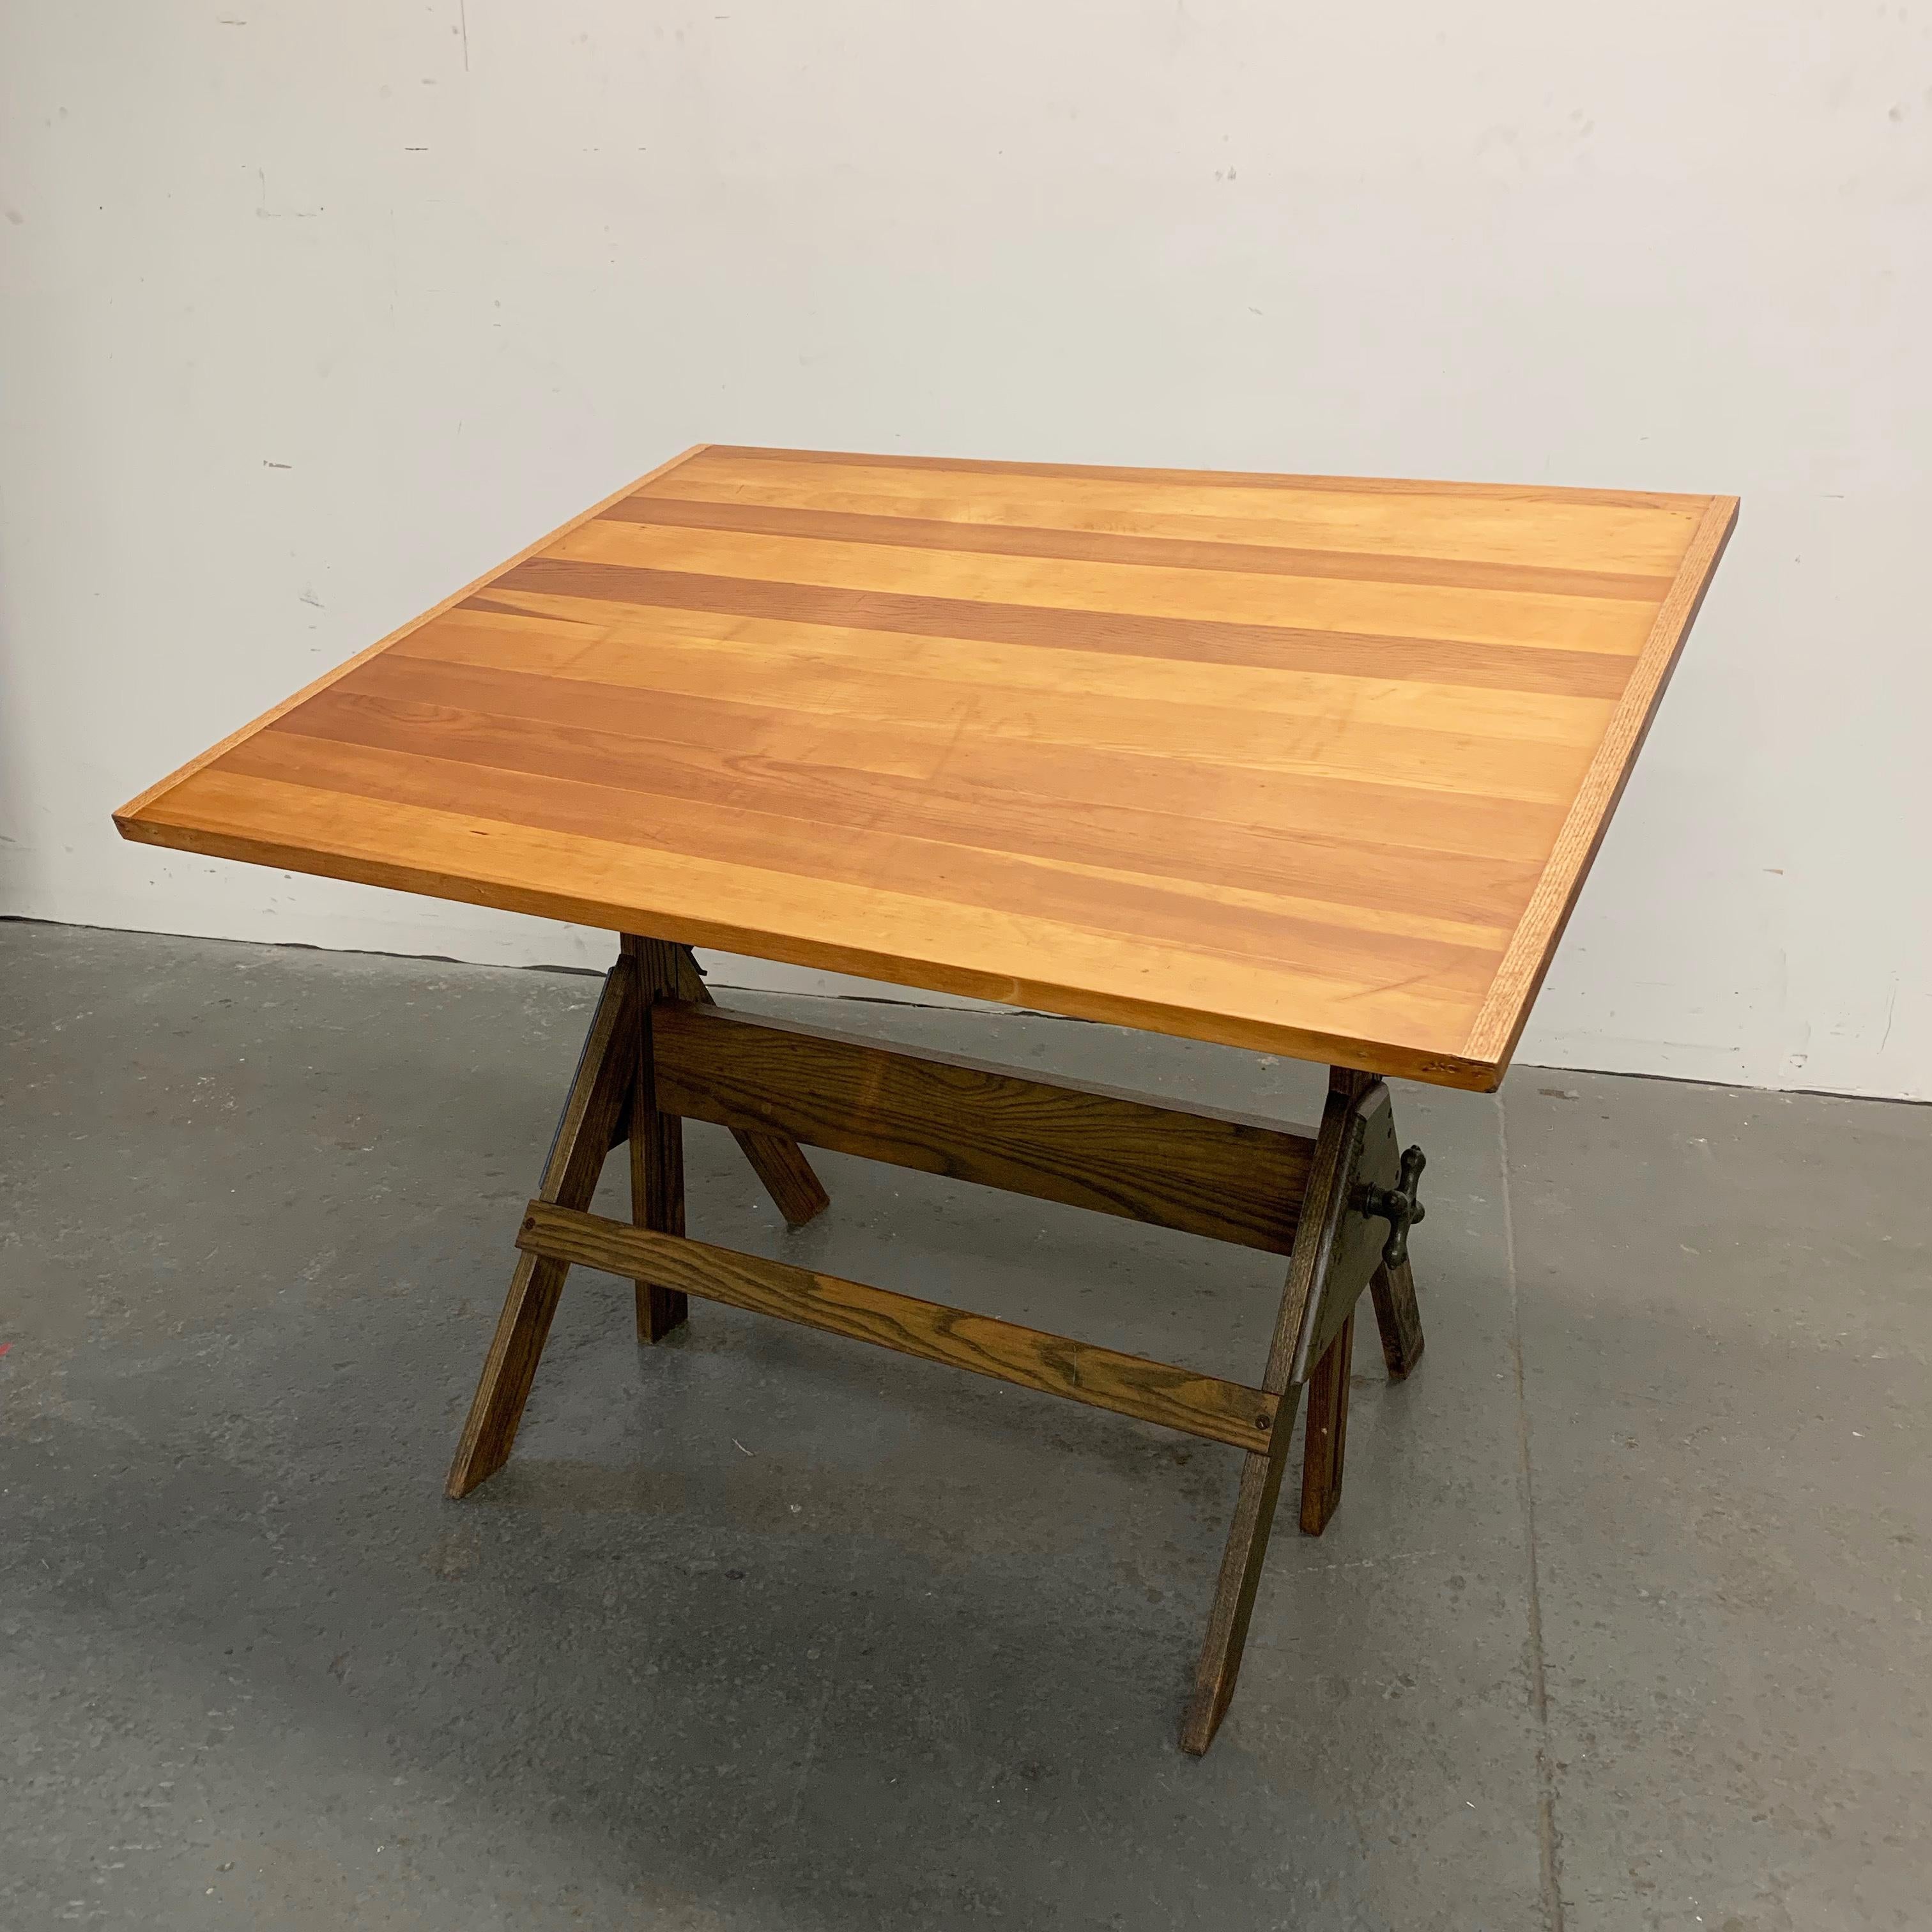 Industrial, mid-20th century, drafting table features an oak base with cast iron fittings and douglas fir top. The table is height adjustable from 32 - 42 inches and tilt adjustable on both sides. The foot print is 32 wide inches x 29 inches deep.